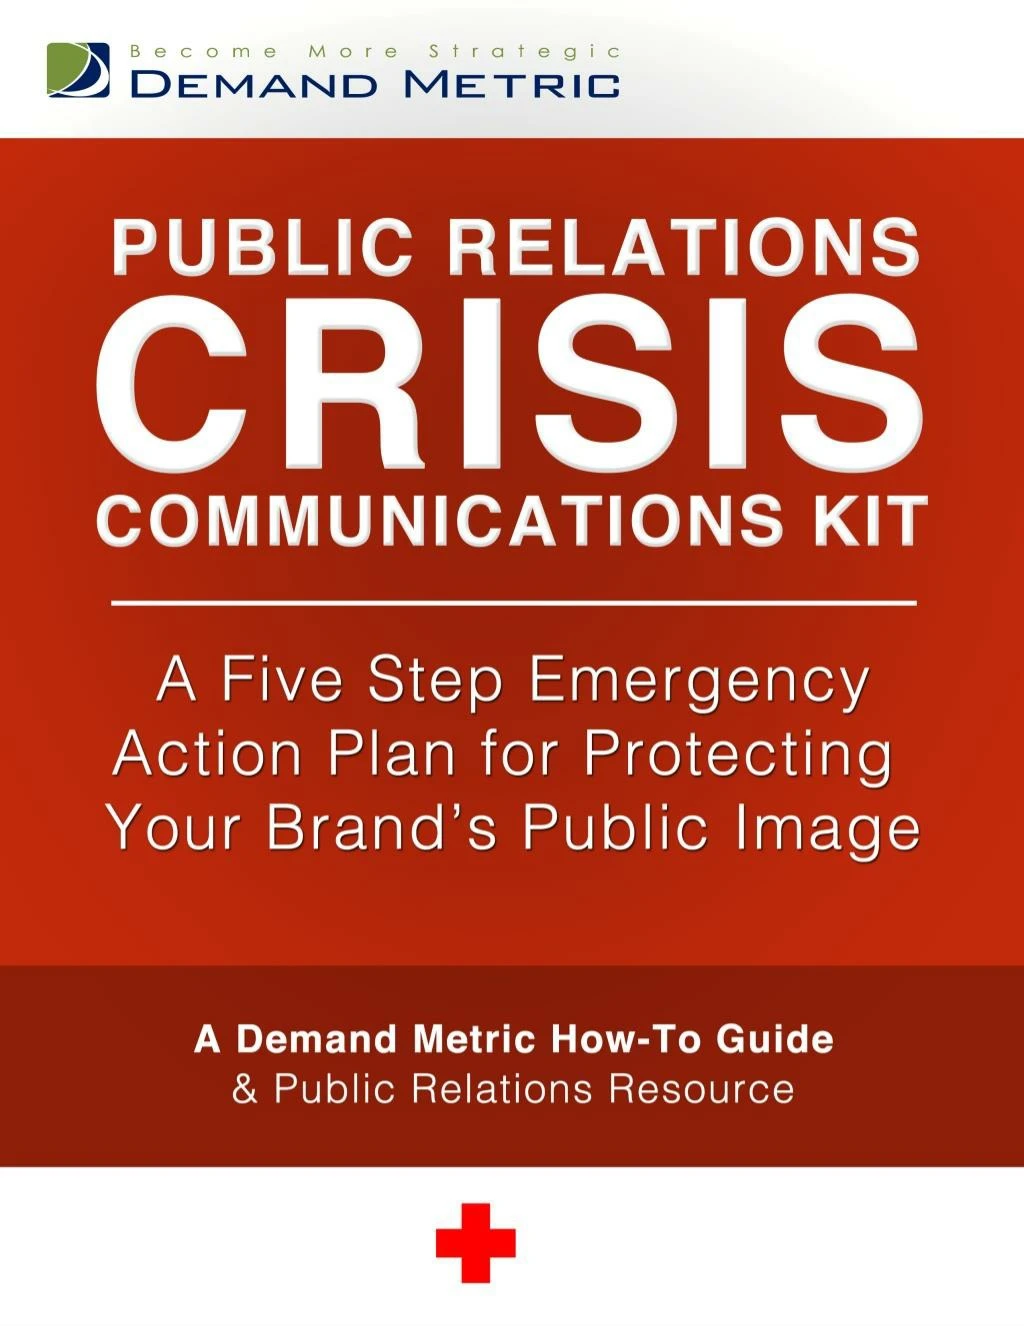 how to guide pr crisis communications kit